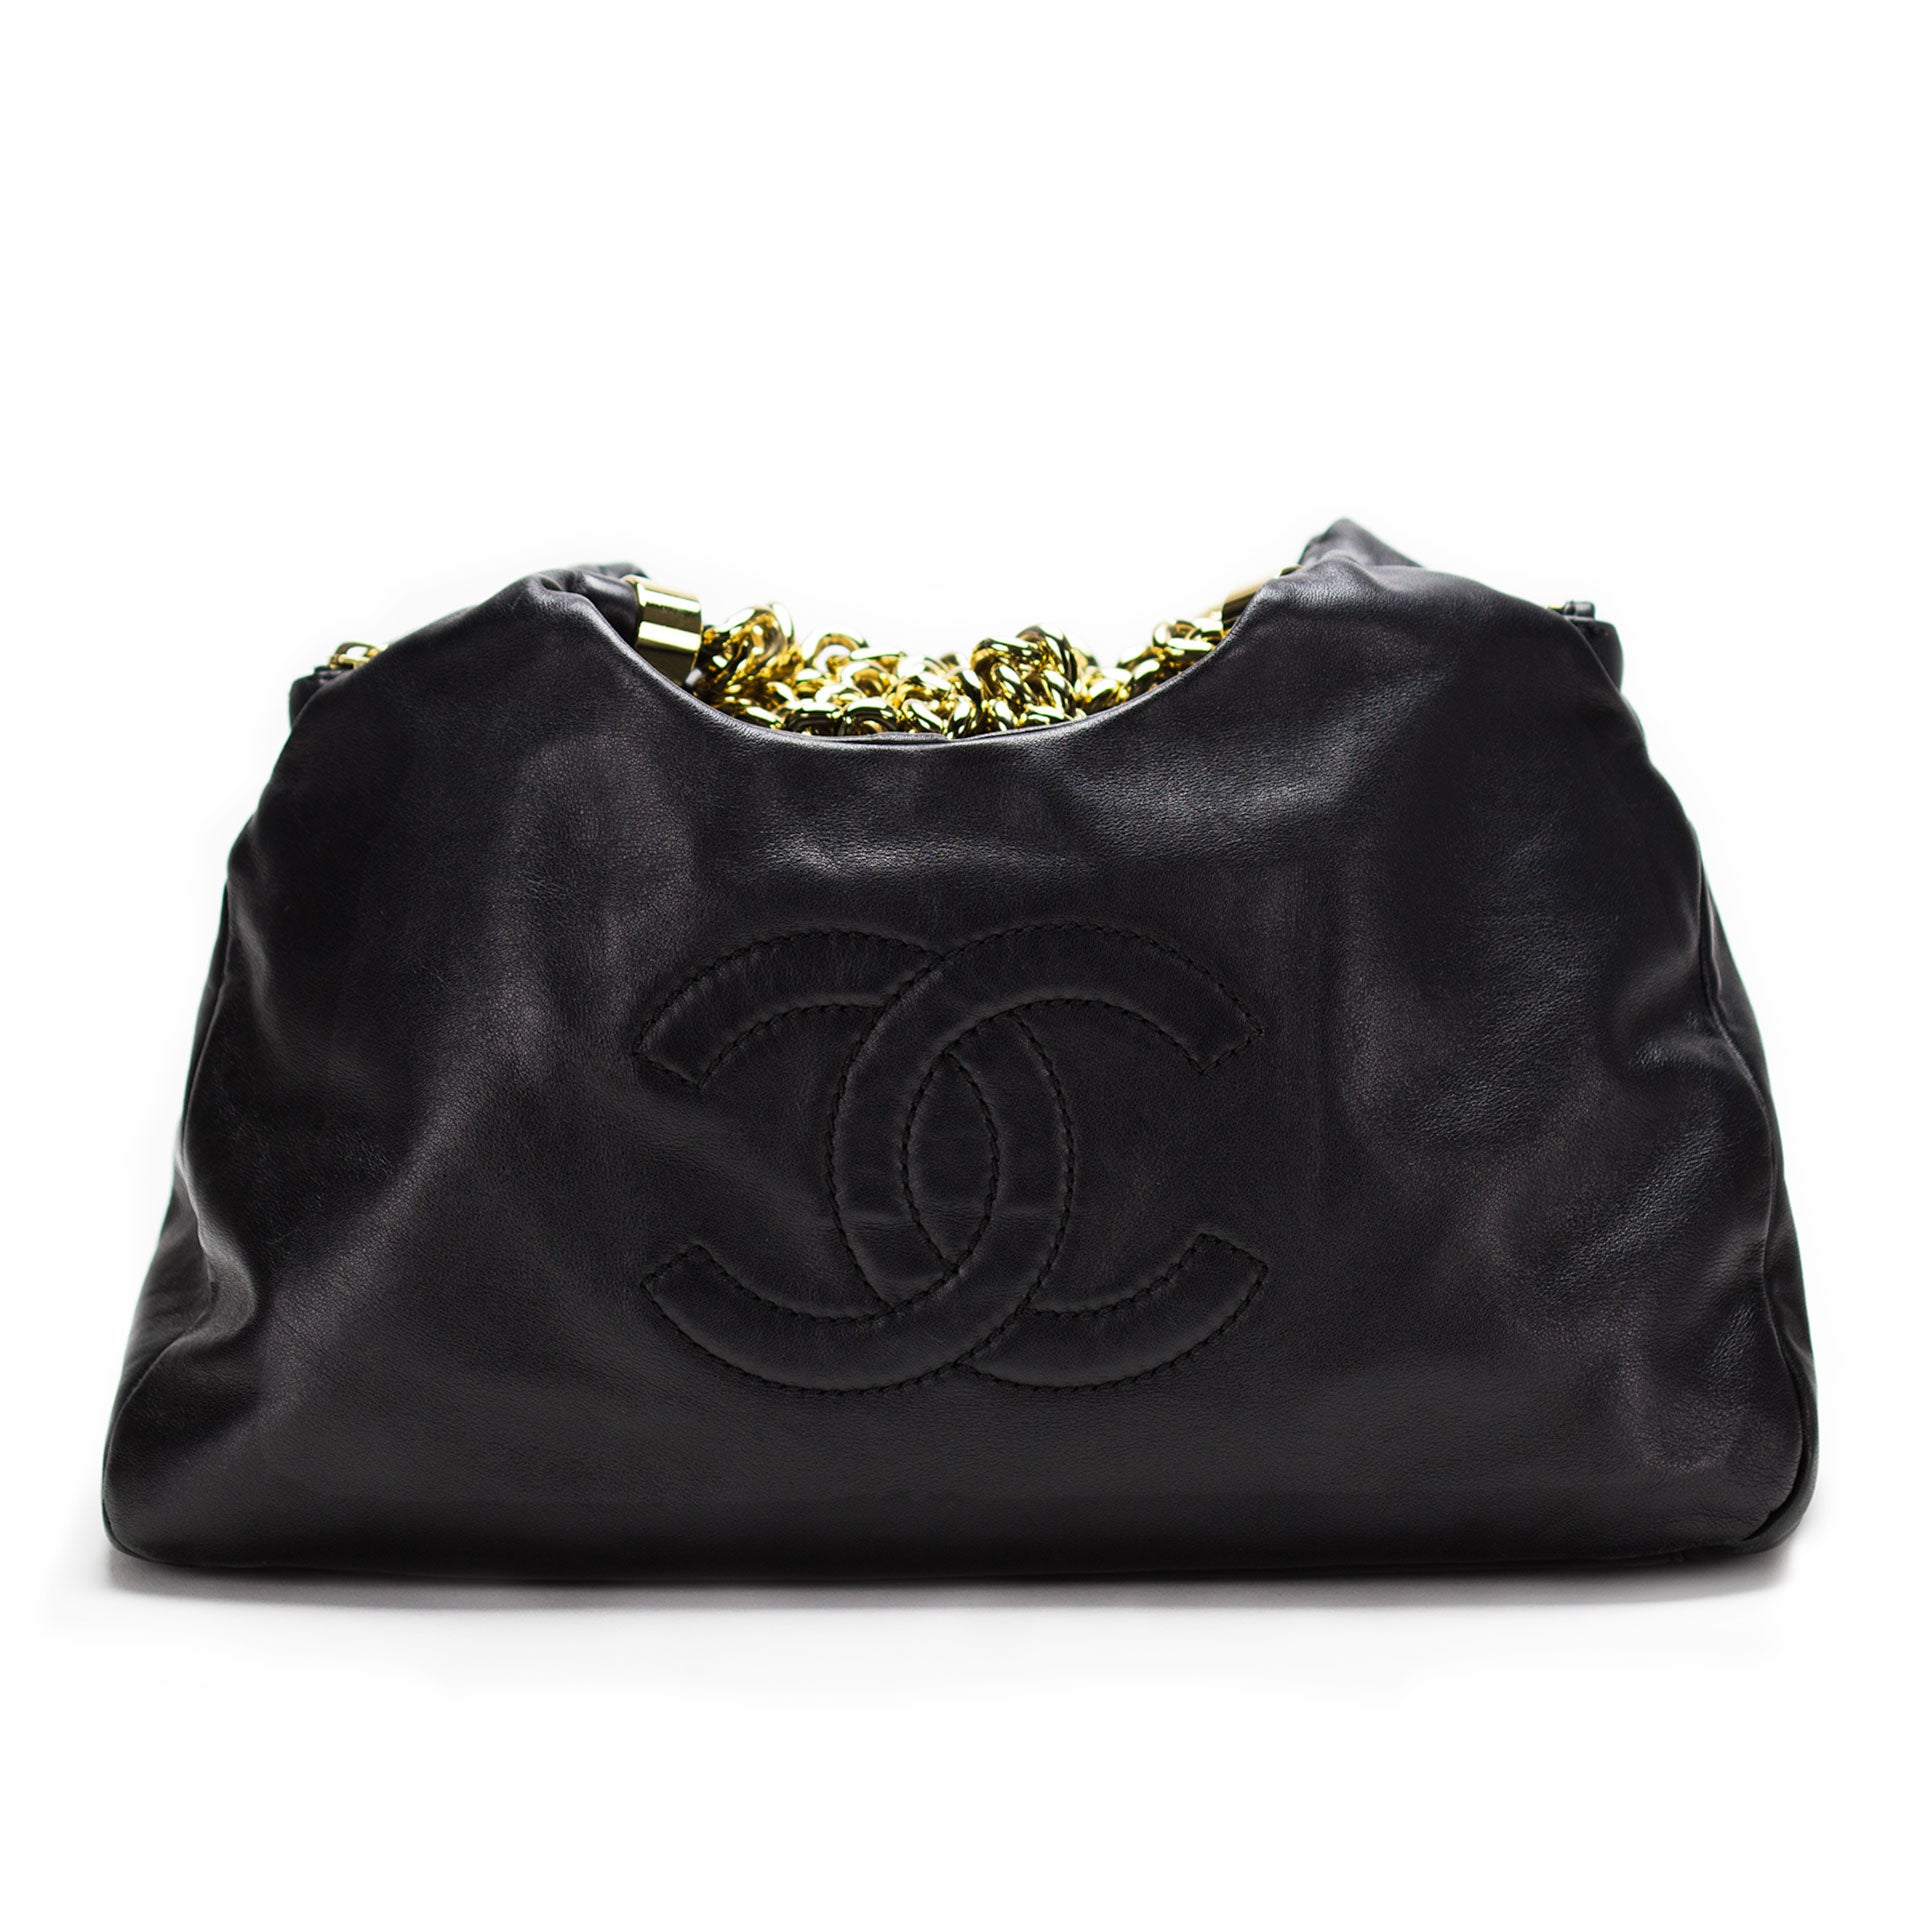 CHANEL OTHER TOTE Bag $2,555.00 - PicClick